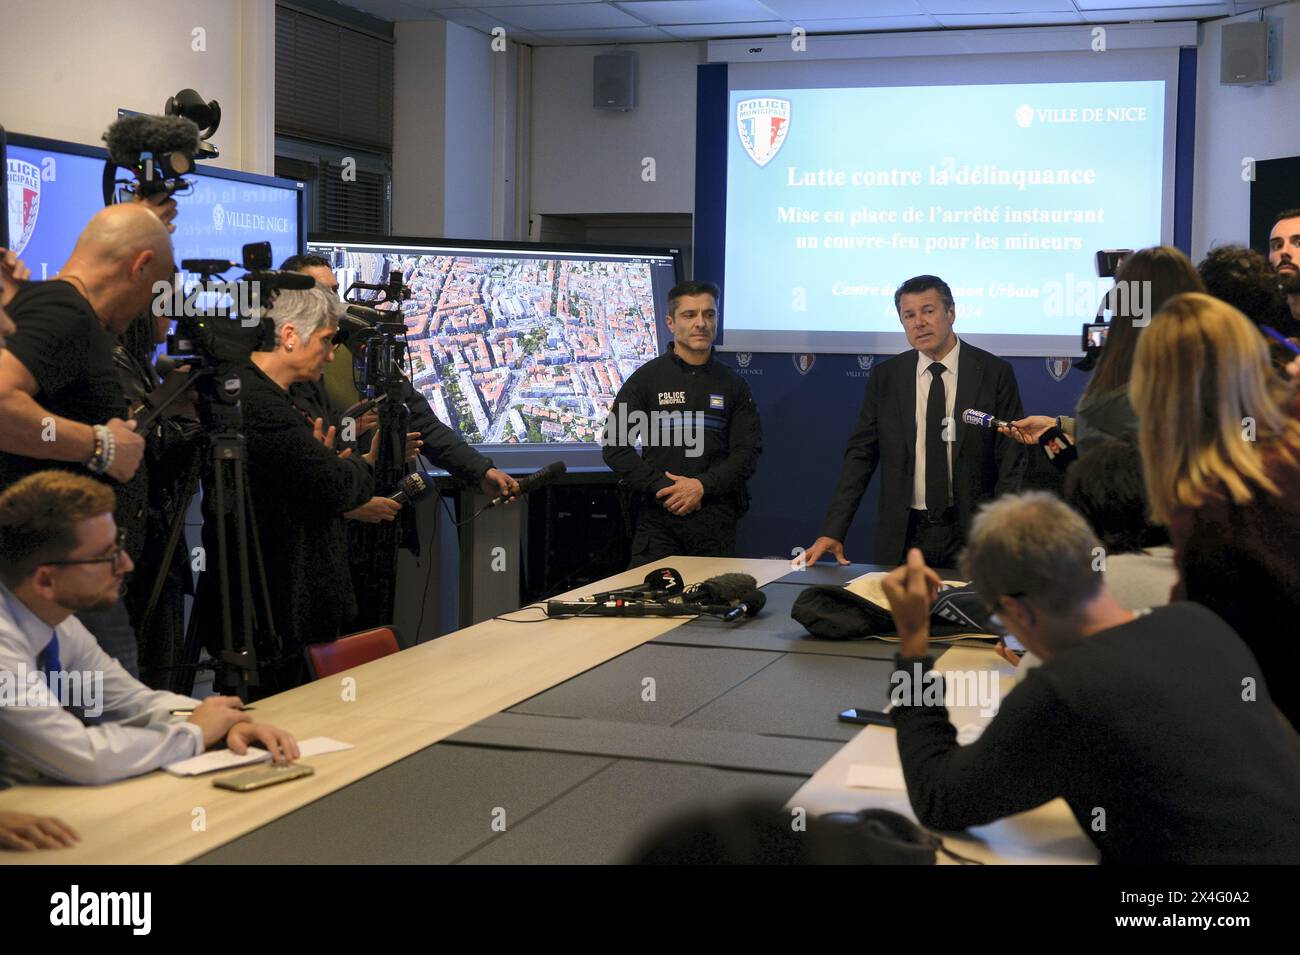 © PHOTOPQR/NICE MATIN/photo ABJ ; Nice ; 02/05/2024 ; Mise en place d'un couvre-feu pour les mineurs niçois ICI LE CHEF DE LA POLICE MUNICIPALE NICOISE ET LE MAIRE CHRISTIAN ESTROSI DANS LE CENTRE CSU DE VIDEOSURVEILLANCE DE NICE Nice, France, may 2nd 2024 the curfew for children under 13 came into force on Wednesday evening This measure is already applied in several other cities, in the name of the fight against delinquency. In the Riviera capital, this curfew is imposed from 11 p.m. to 6 a.m., “during the summer period and at all gathering points”. Stock Photo